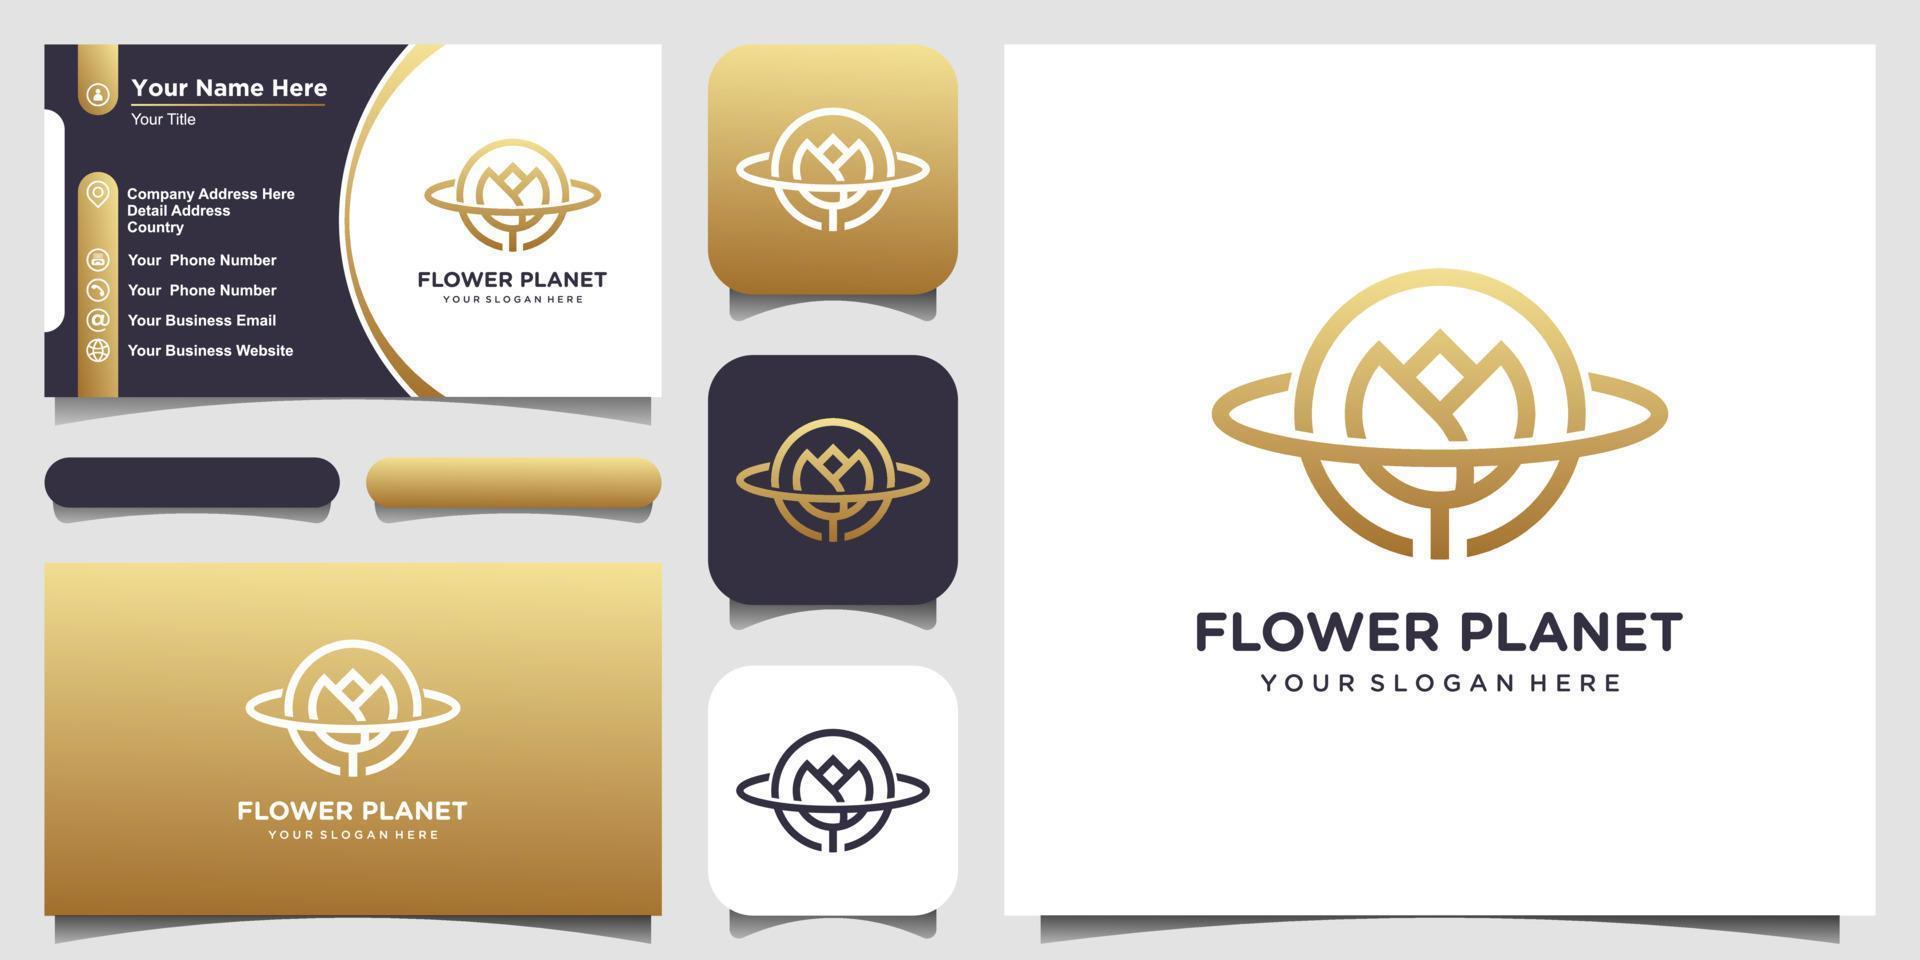 creative planet rose logo concept and business card design vector